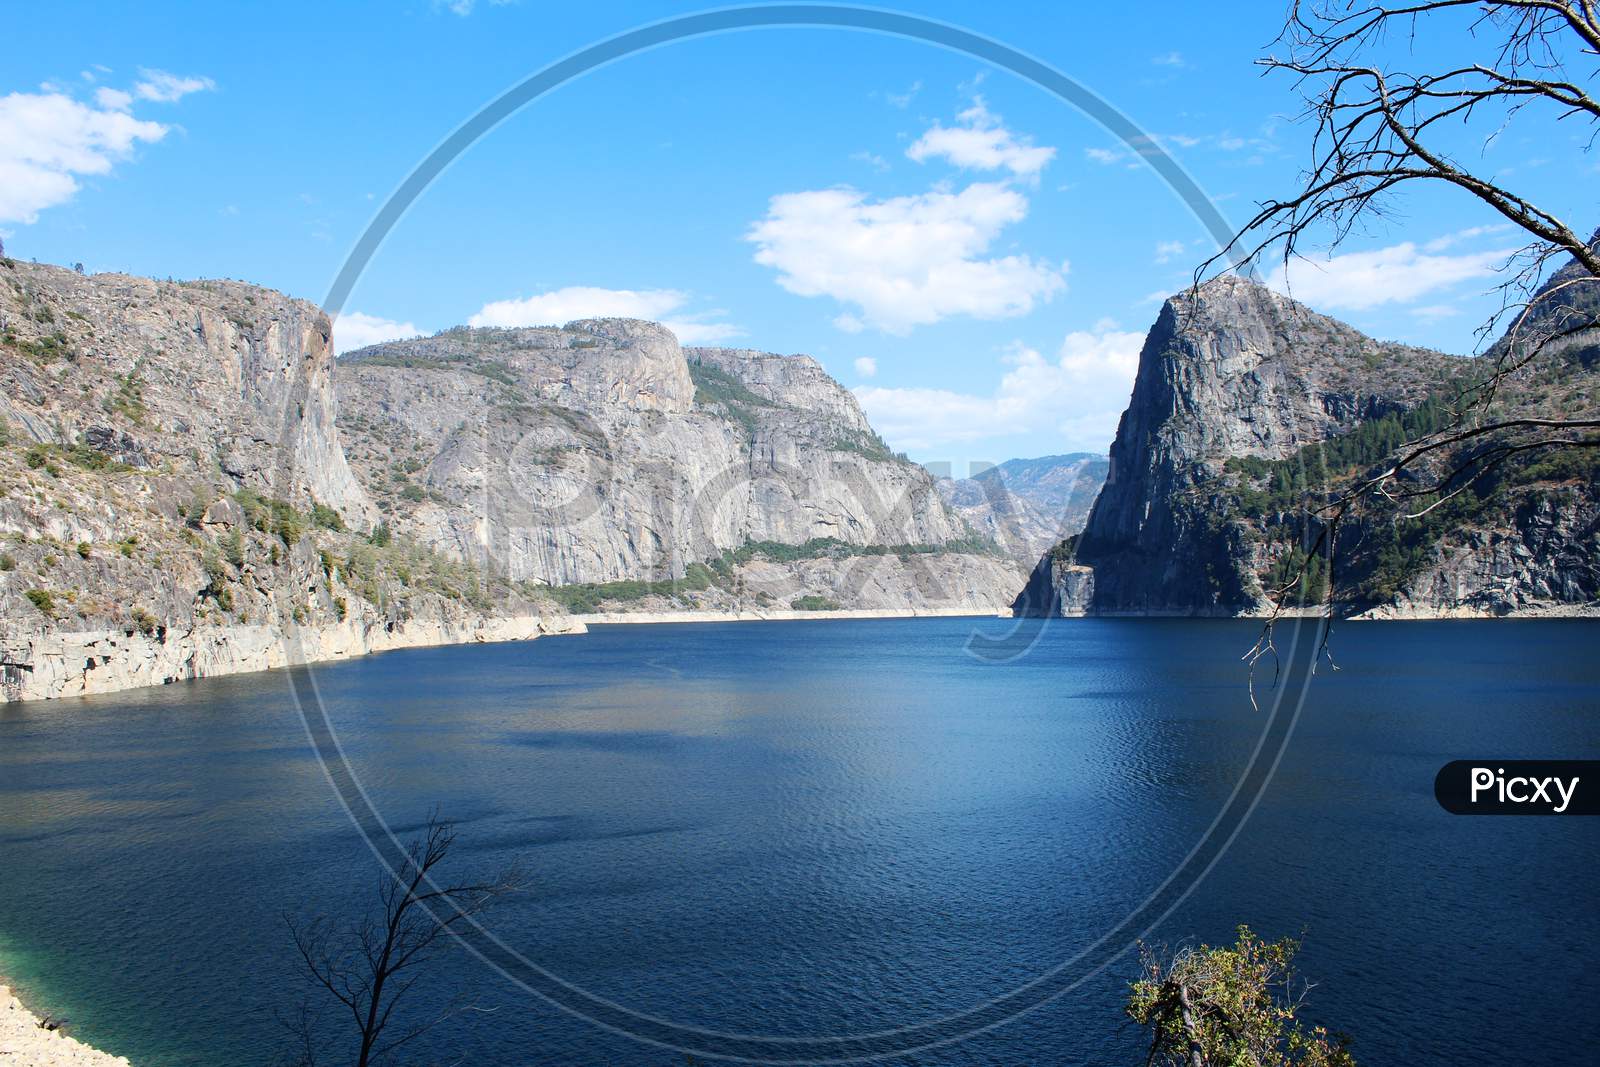 View Of The Hetch Hetchy Reservoir From Trail, California, Usa